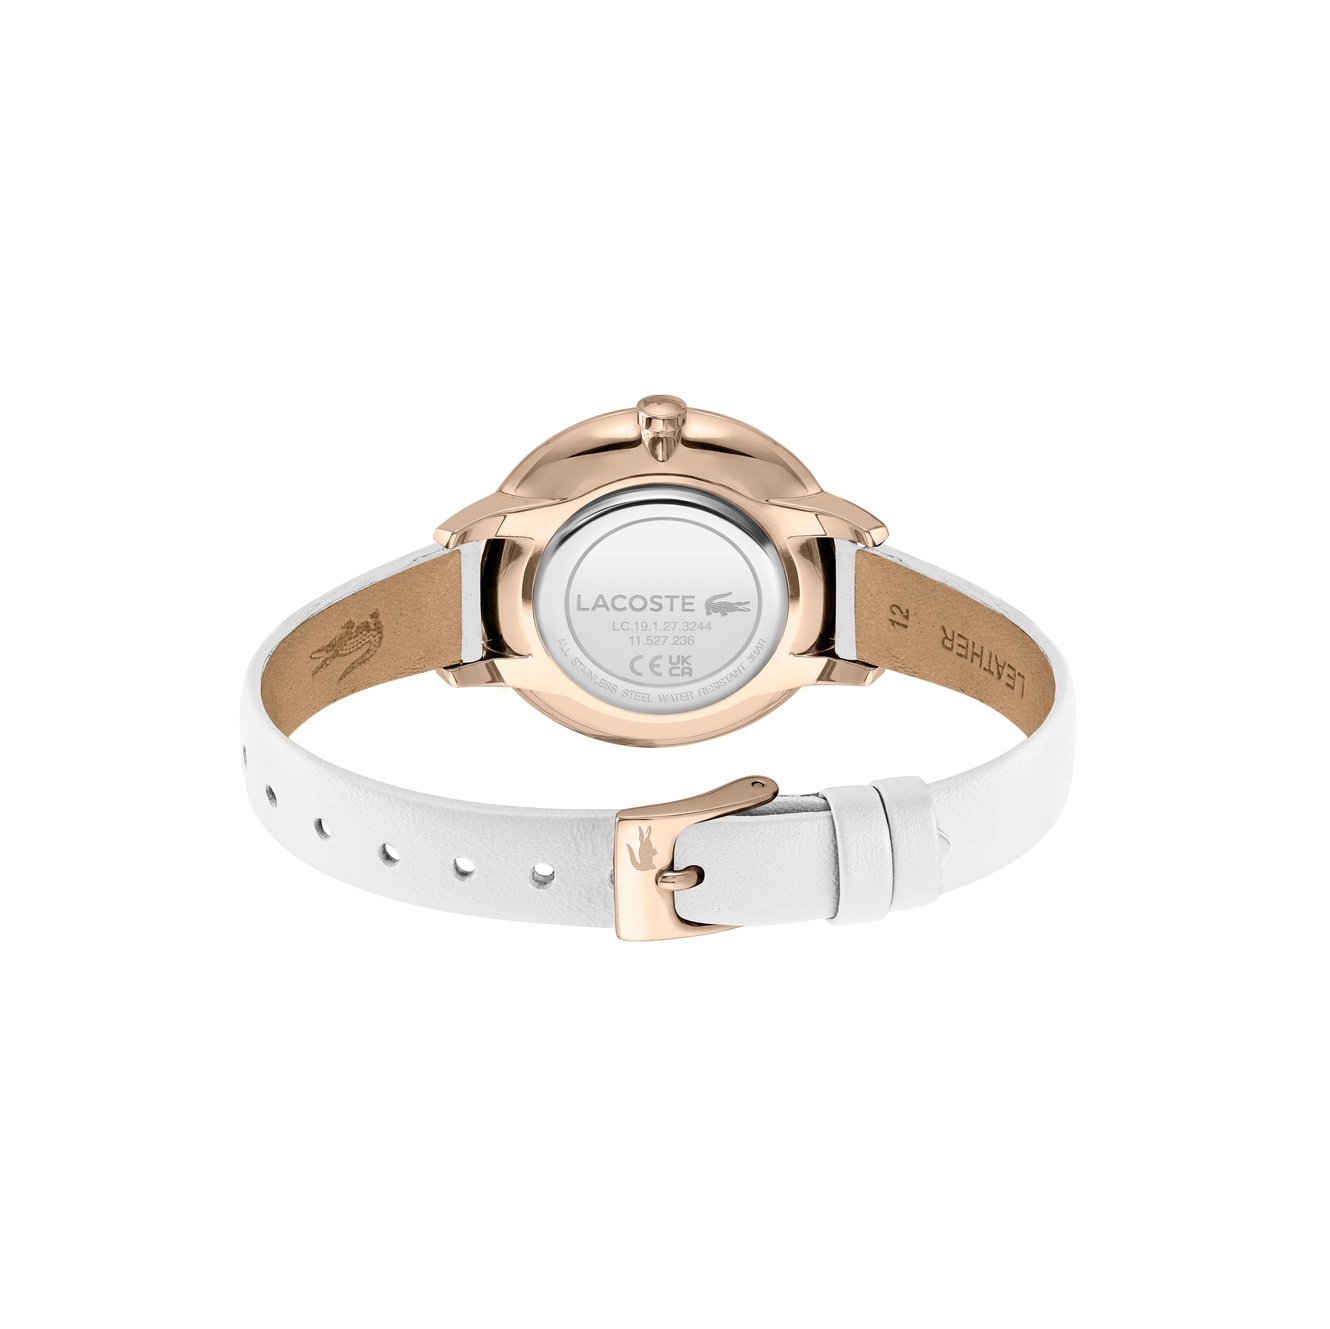 Ladies Cannes Watch 2001253 Lacoste